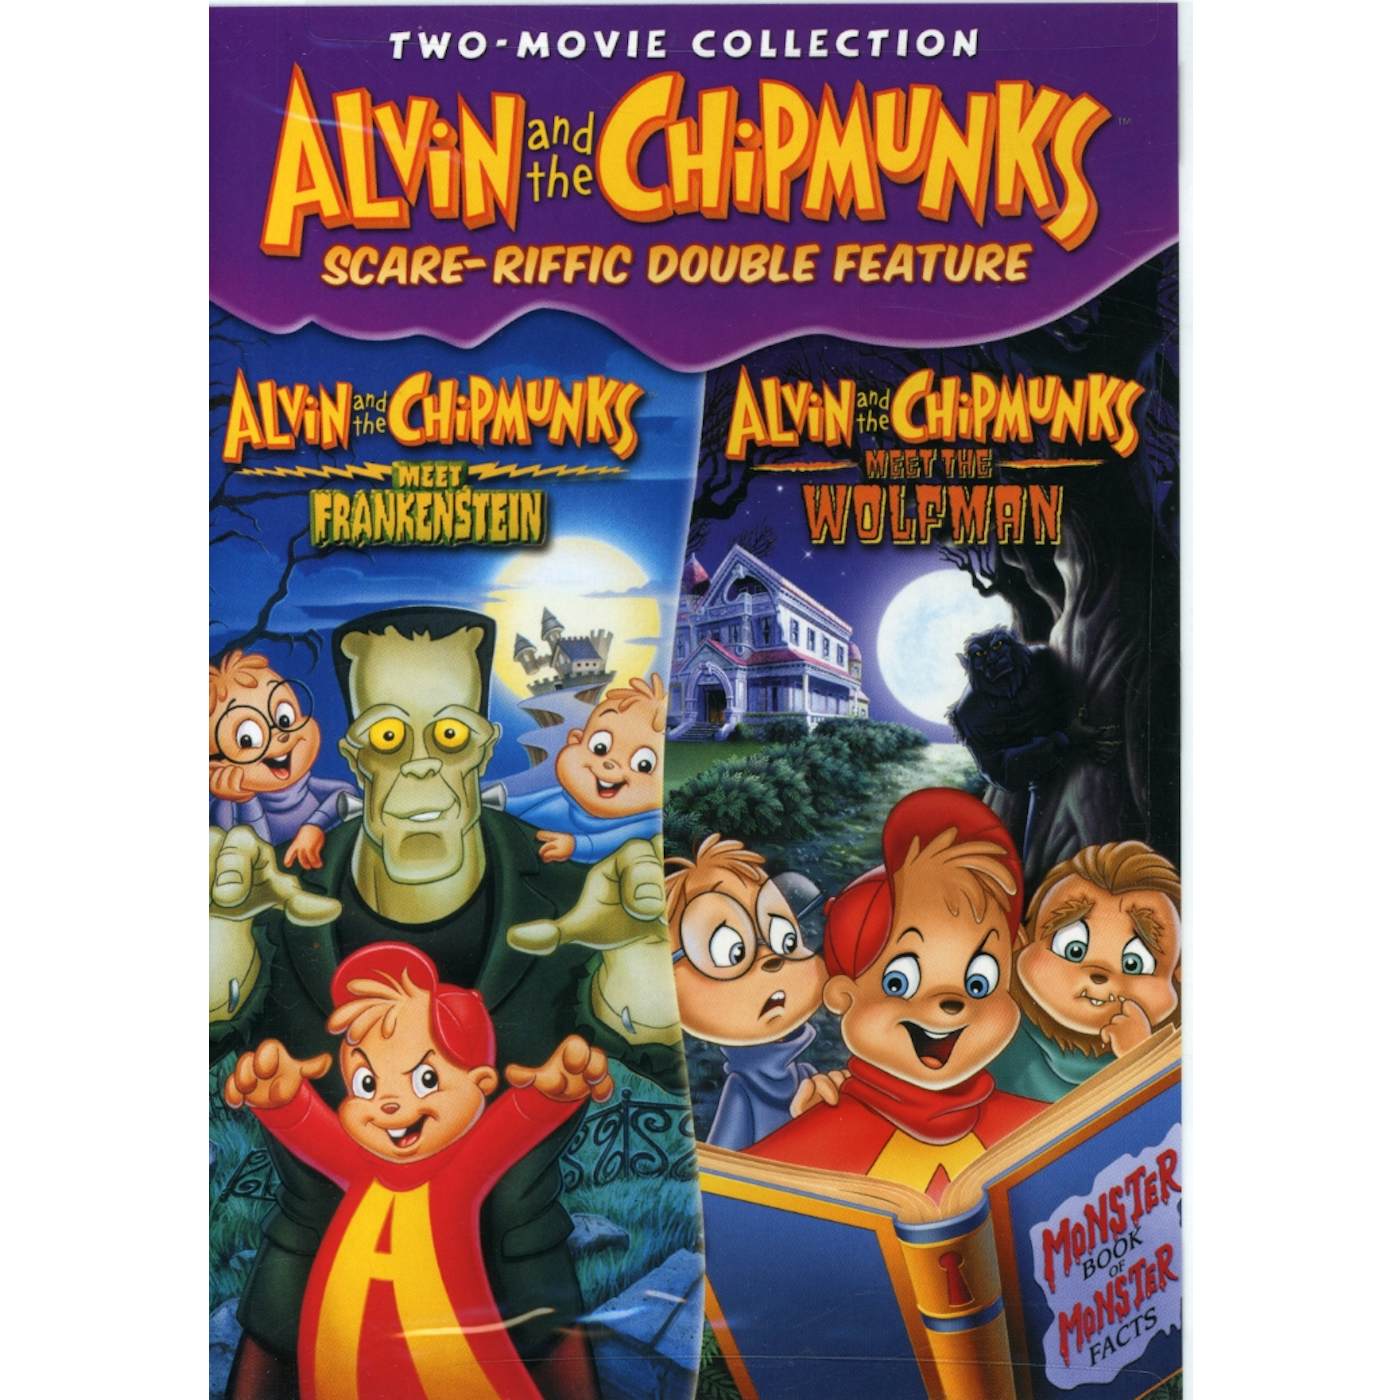 Alvin and the Chipmunks SCARE-RIFFIC DOUBLE FEATURE DVD